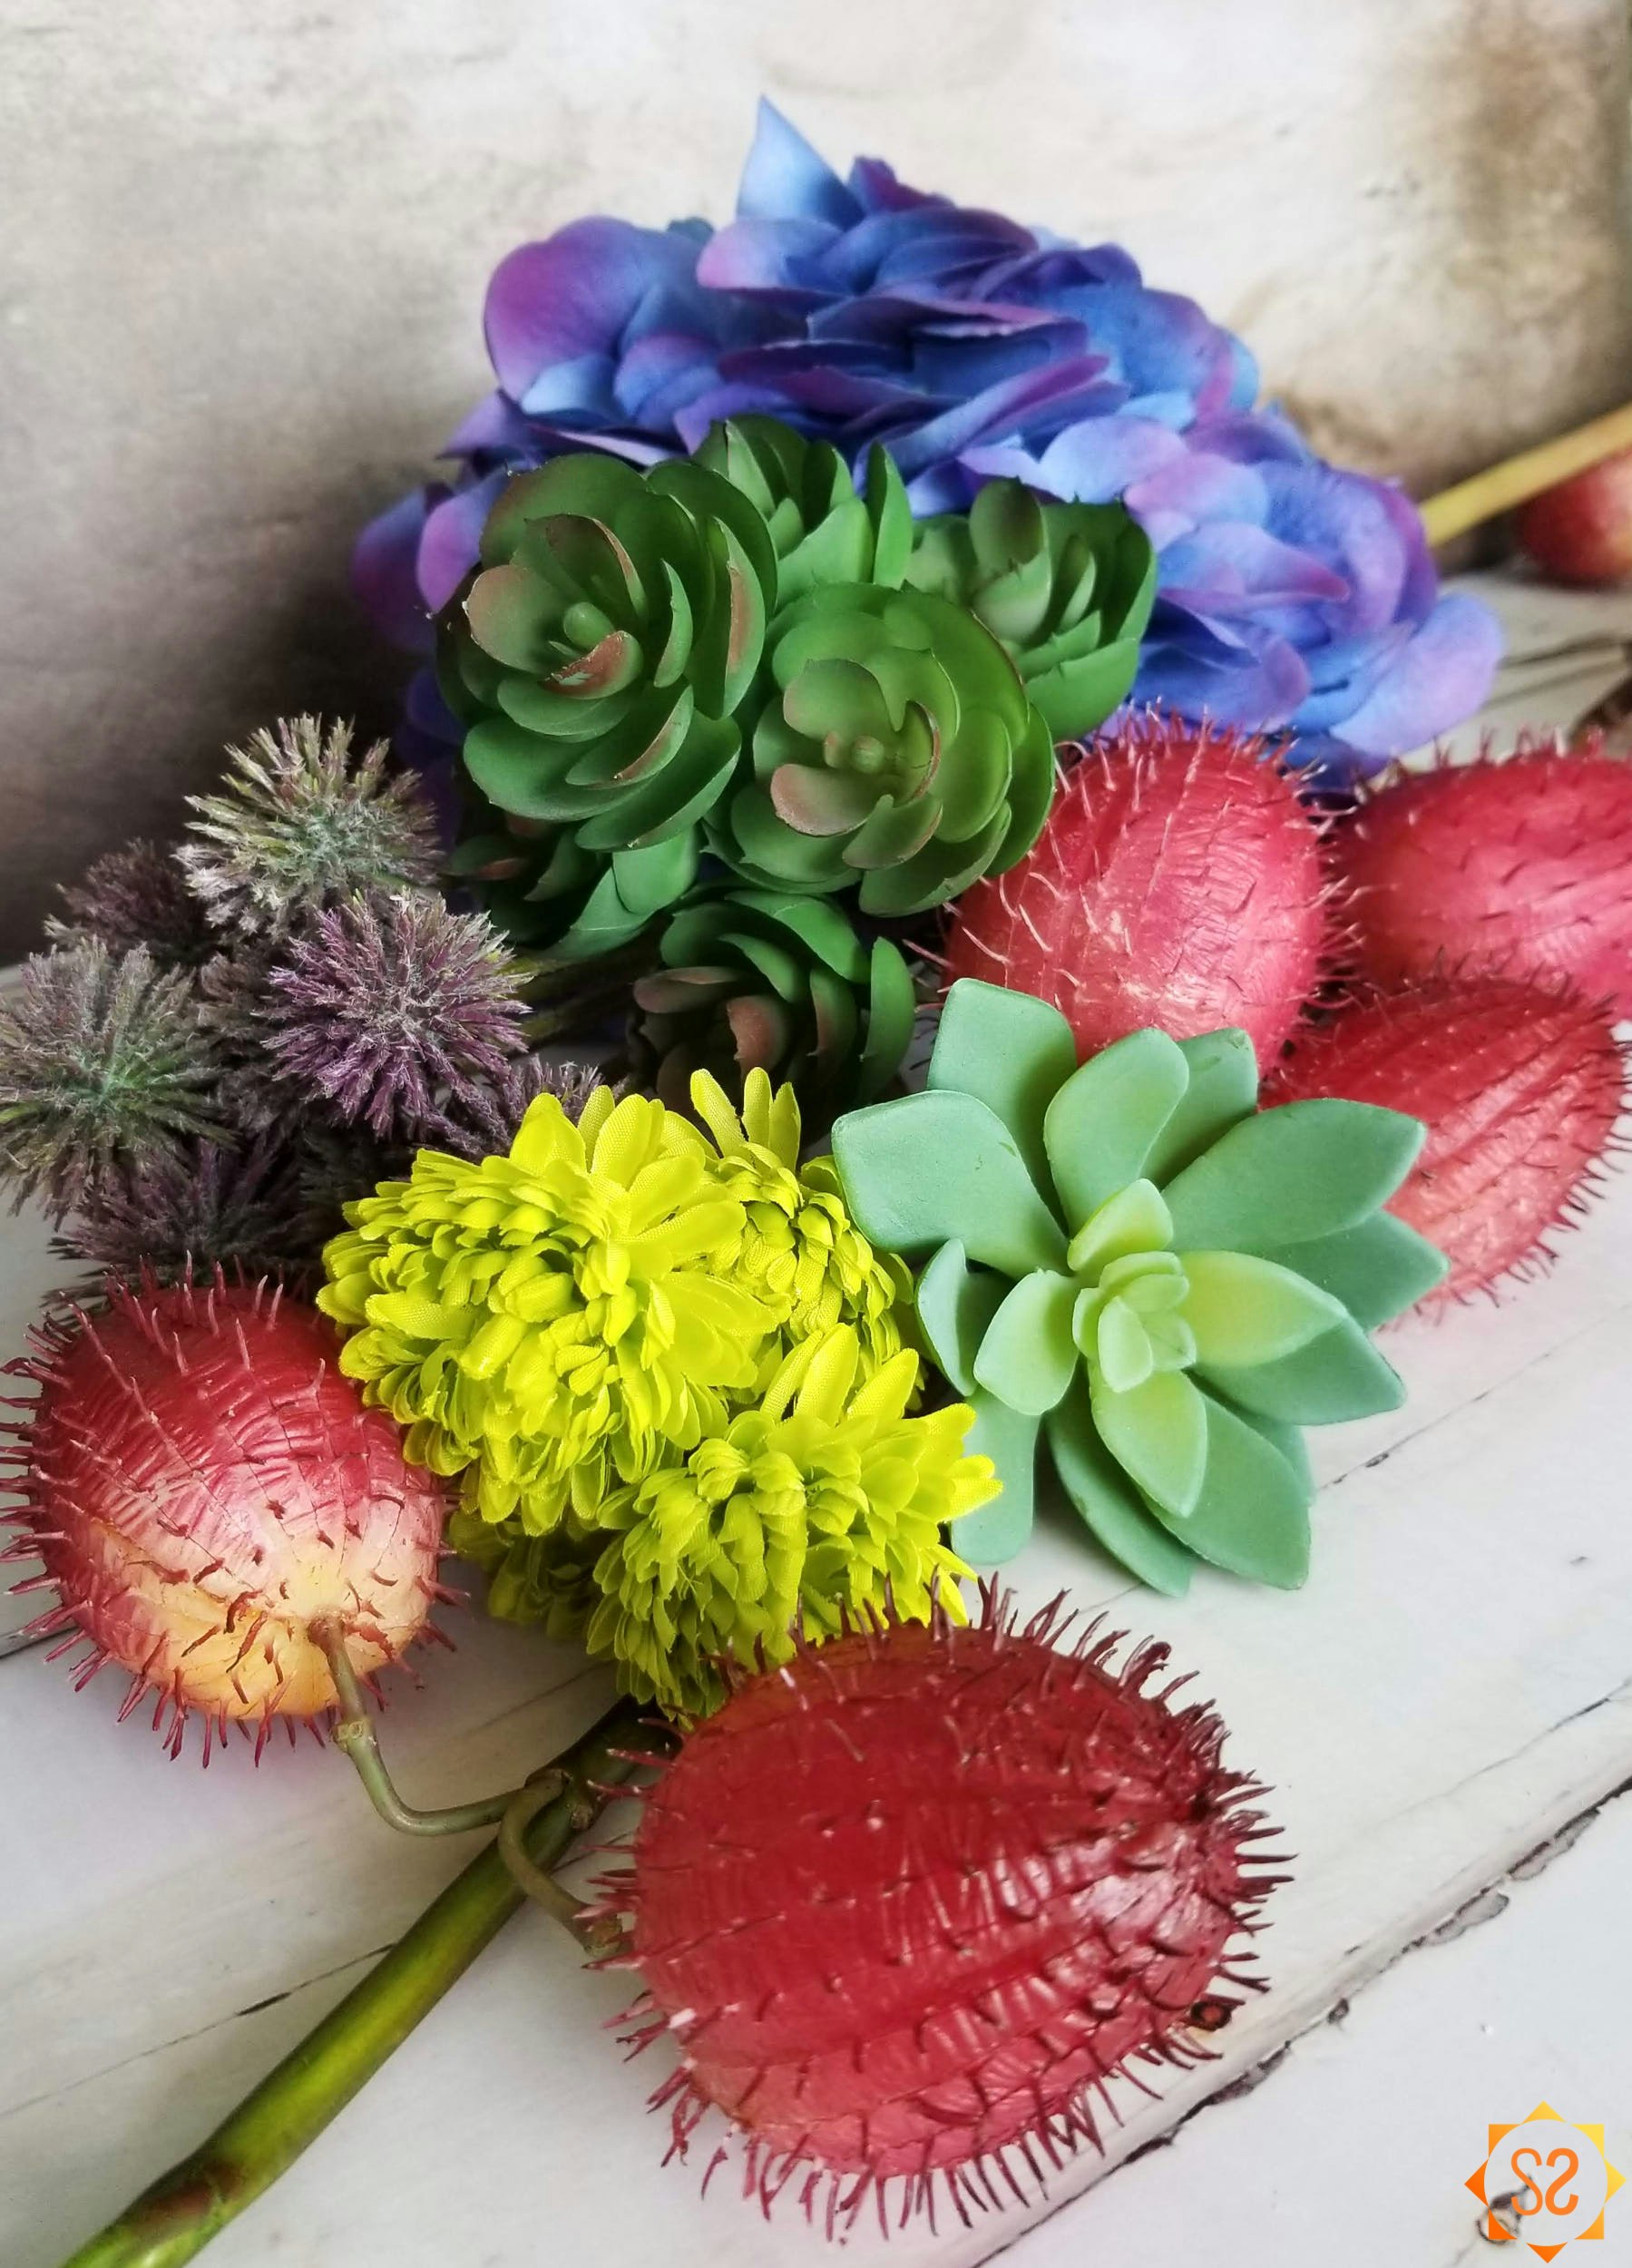 An assortment of exotic flowers